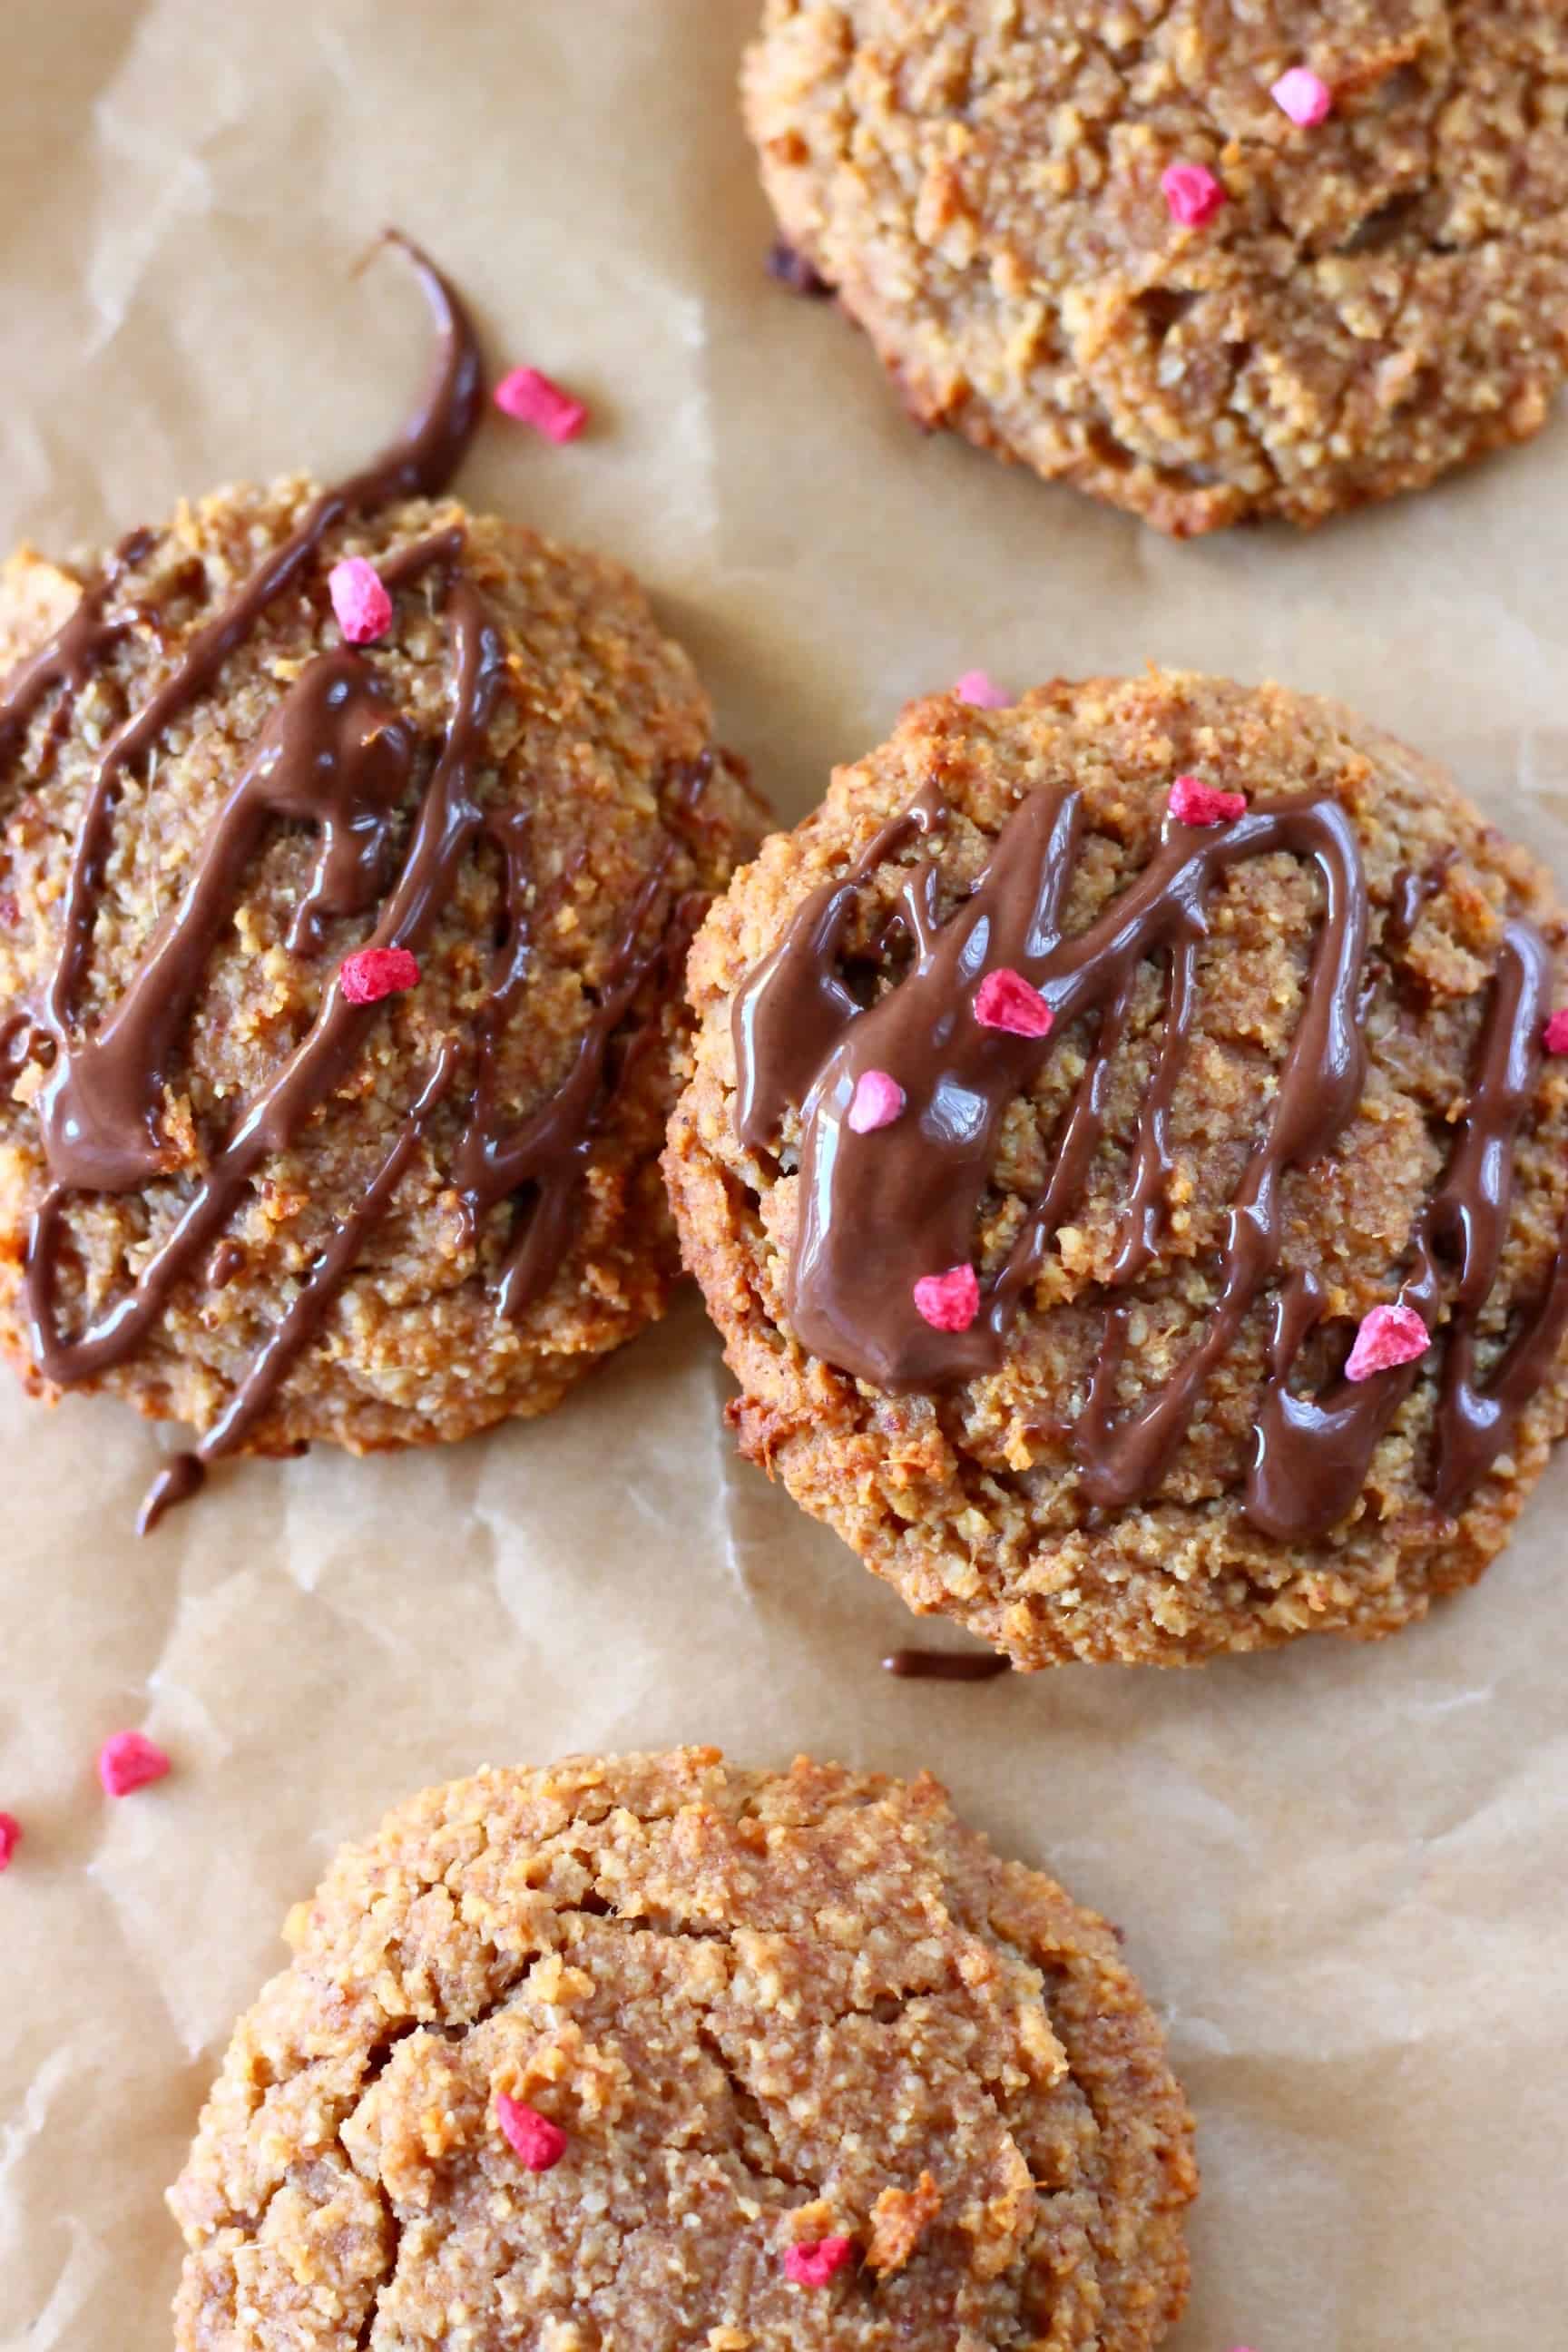 Four ginger cookies on a sheet of brown baking paper with two drizzled with melted dark chocolate and sprinkled with freeze-dried raspberries